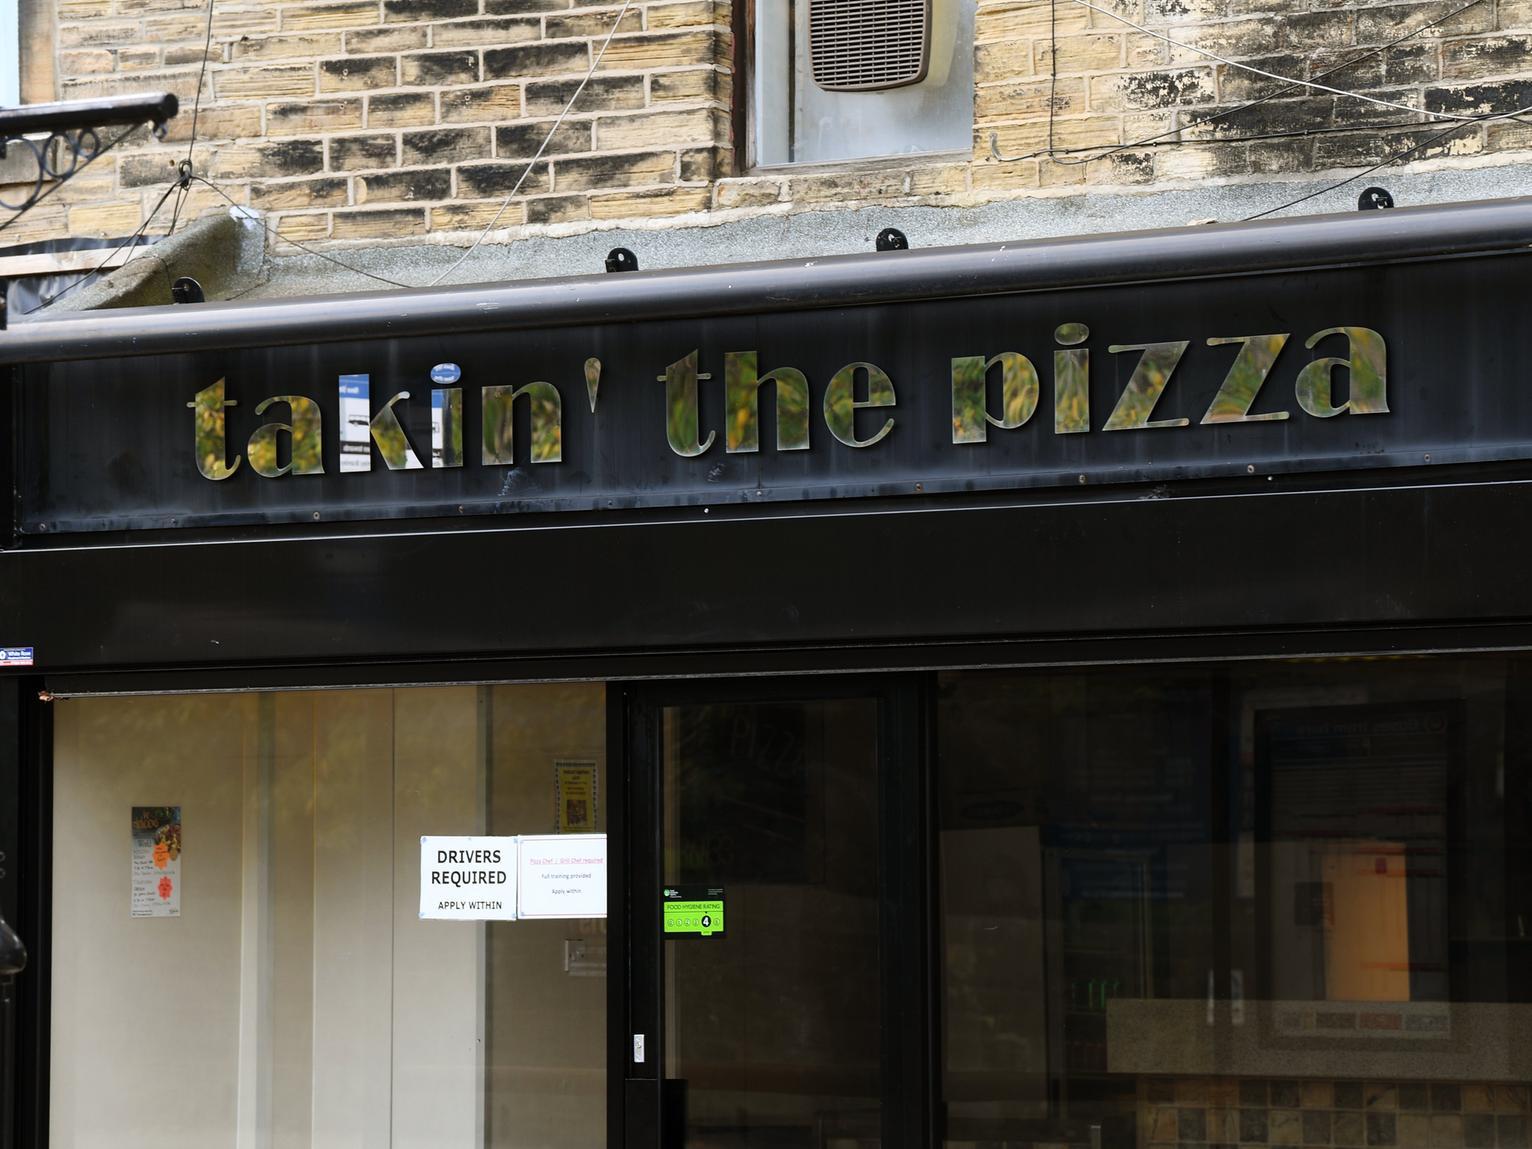 Somewhat of an institution for pizza lovers on Farsley Town Street.